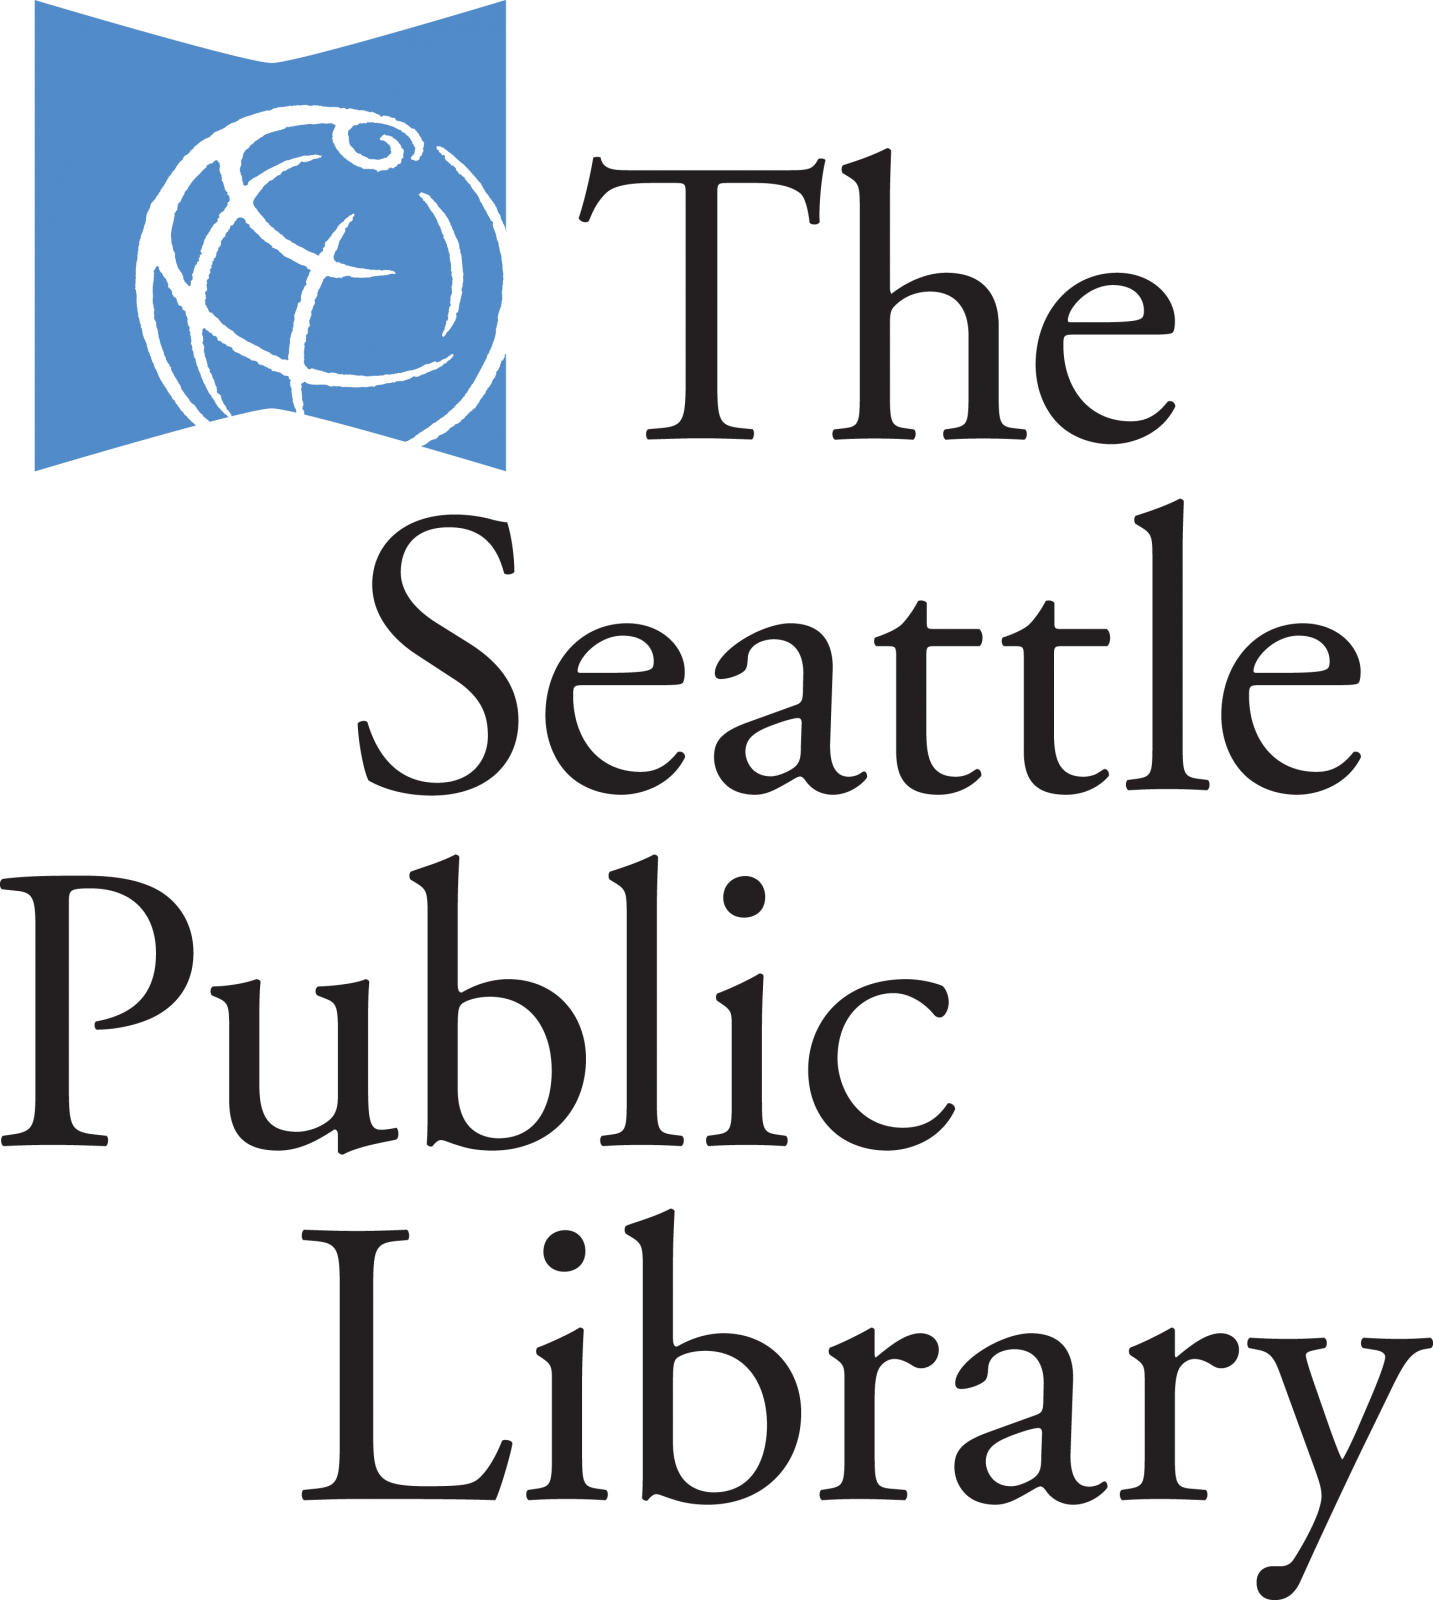 The Seattle Public Library